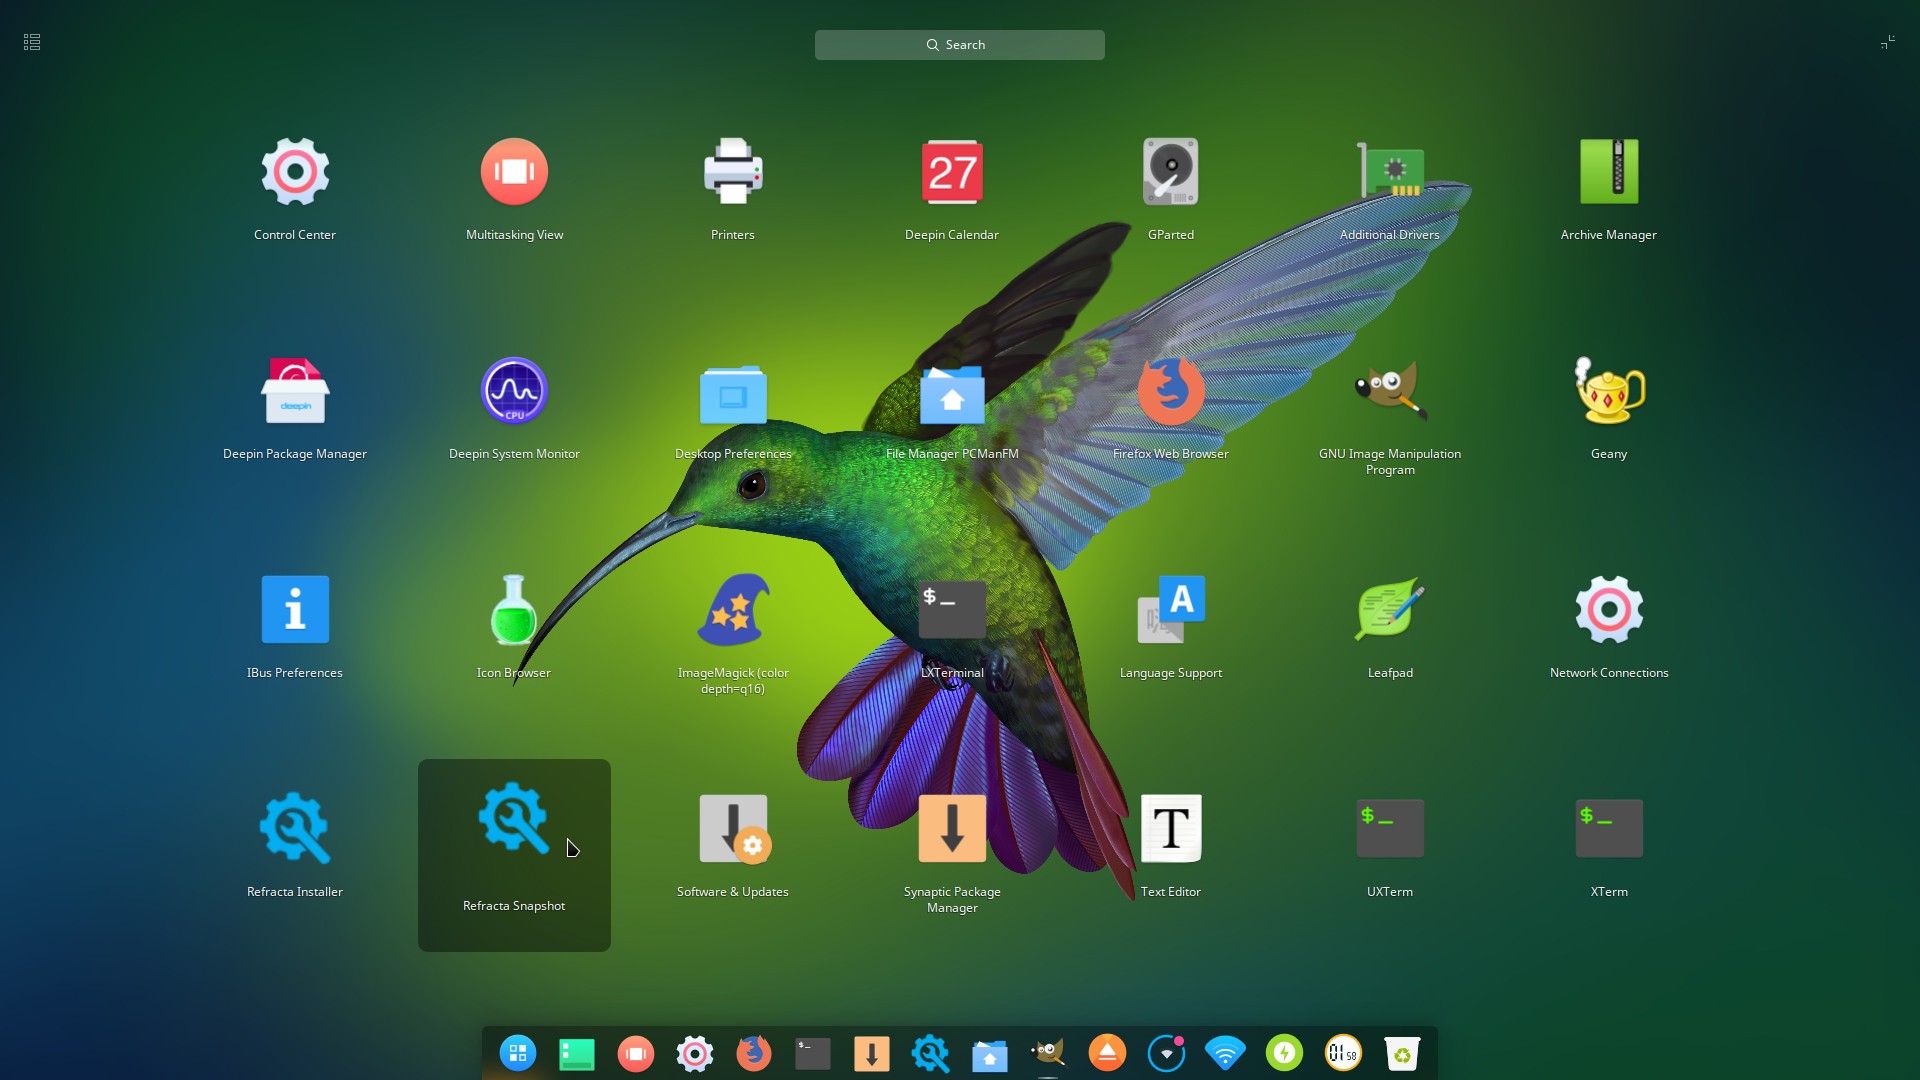 ExTiX, the Ultimate Linux System, Now Has a Deepin Edition Based